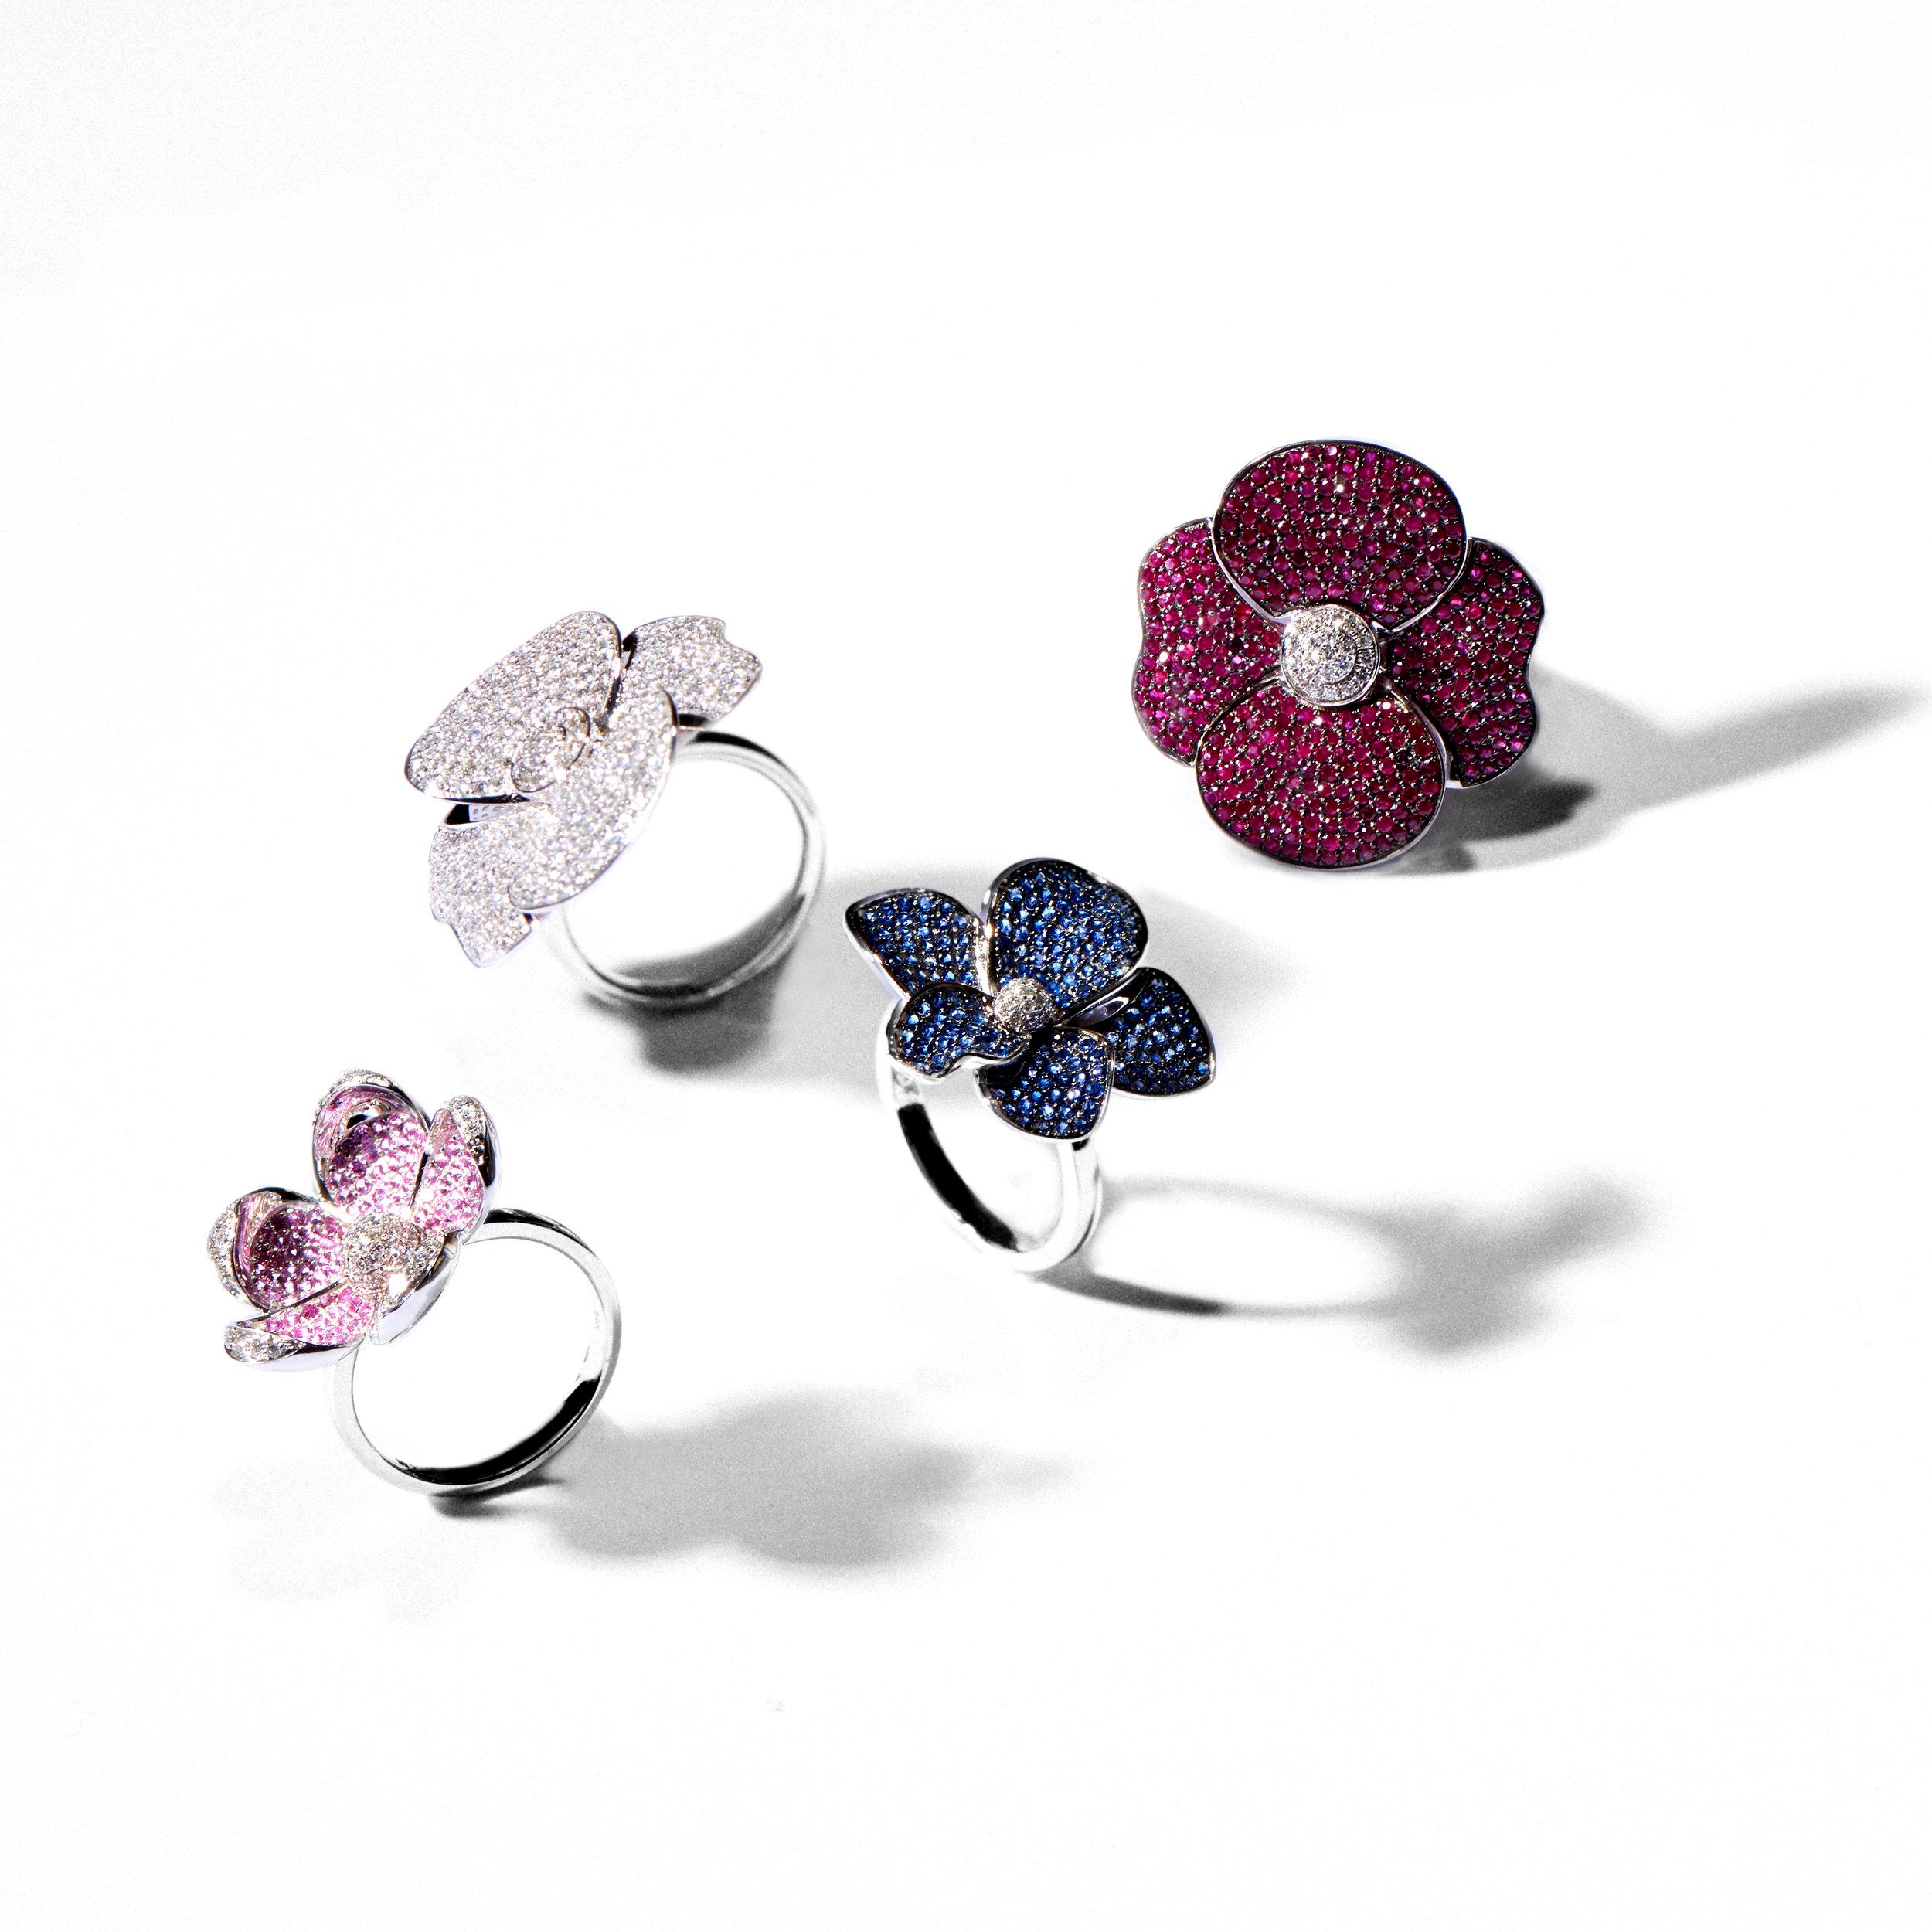 Inspired by the graceful form of an orchid, this cocktail ring features a dazzling array of brilliant blue sapphires that create an eye-catching play of light and reflection. Five asymmetrical petals of blue sapphires surround a central circle of